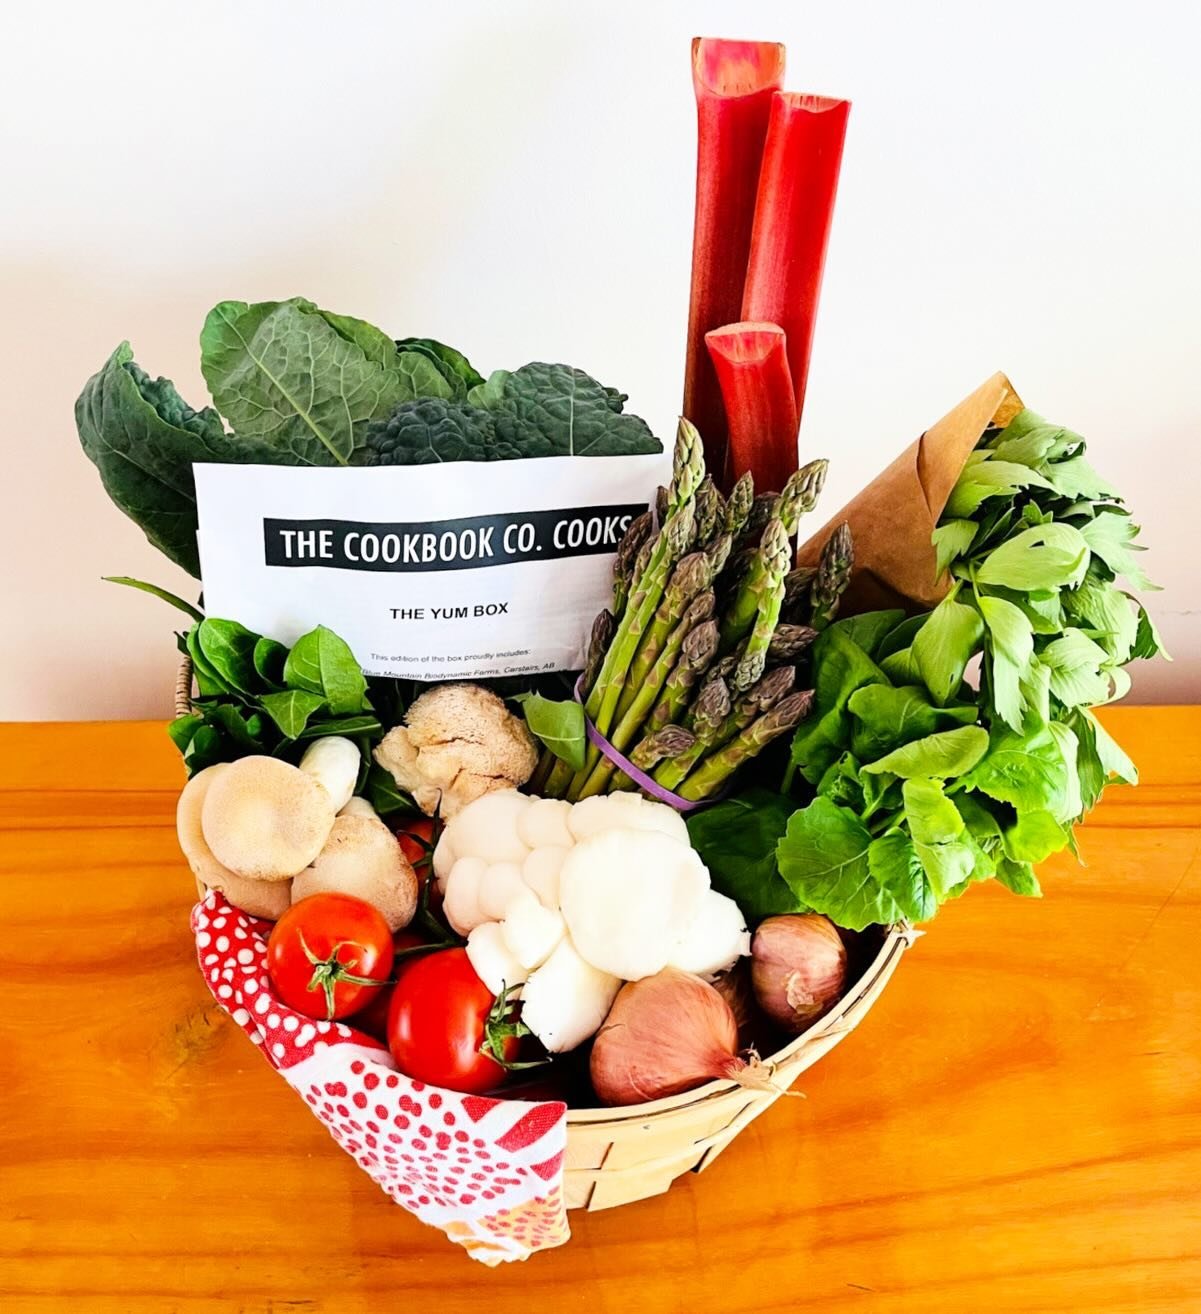 ✨Produce🥬Boxes🧄Are🌿Back!✨

Our produce boxes are a gathering of fresh Alberta and BC produce, accompanied by recipes that will keep you cooking all season long.

May 25 Box
Wild Green Garlic
Morel Mushrooms
Butter Lettuce
Asparagus
Rhubarb
Green O